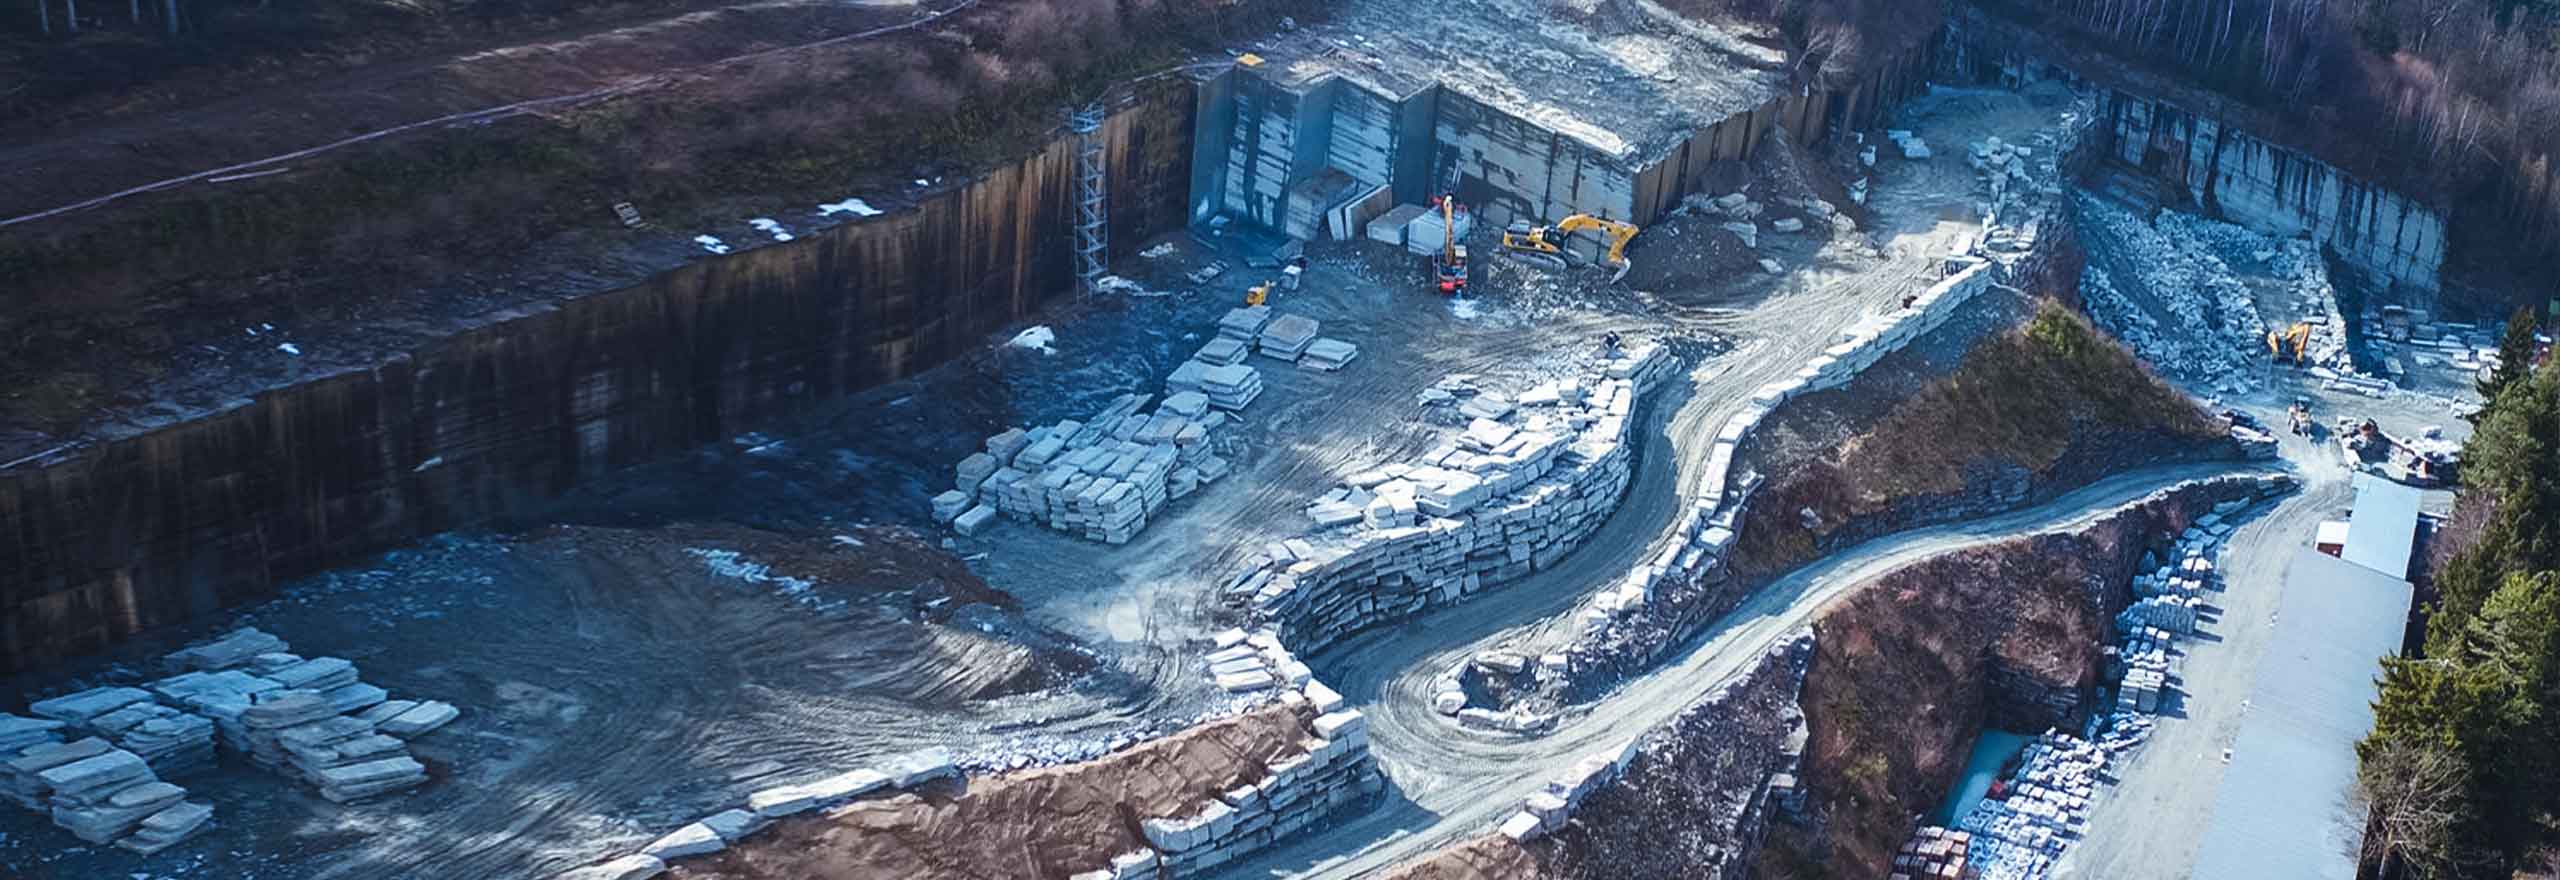 Drone footage of mining site